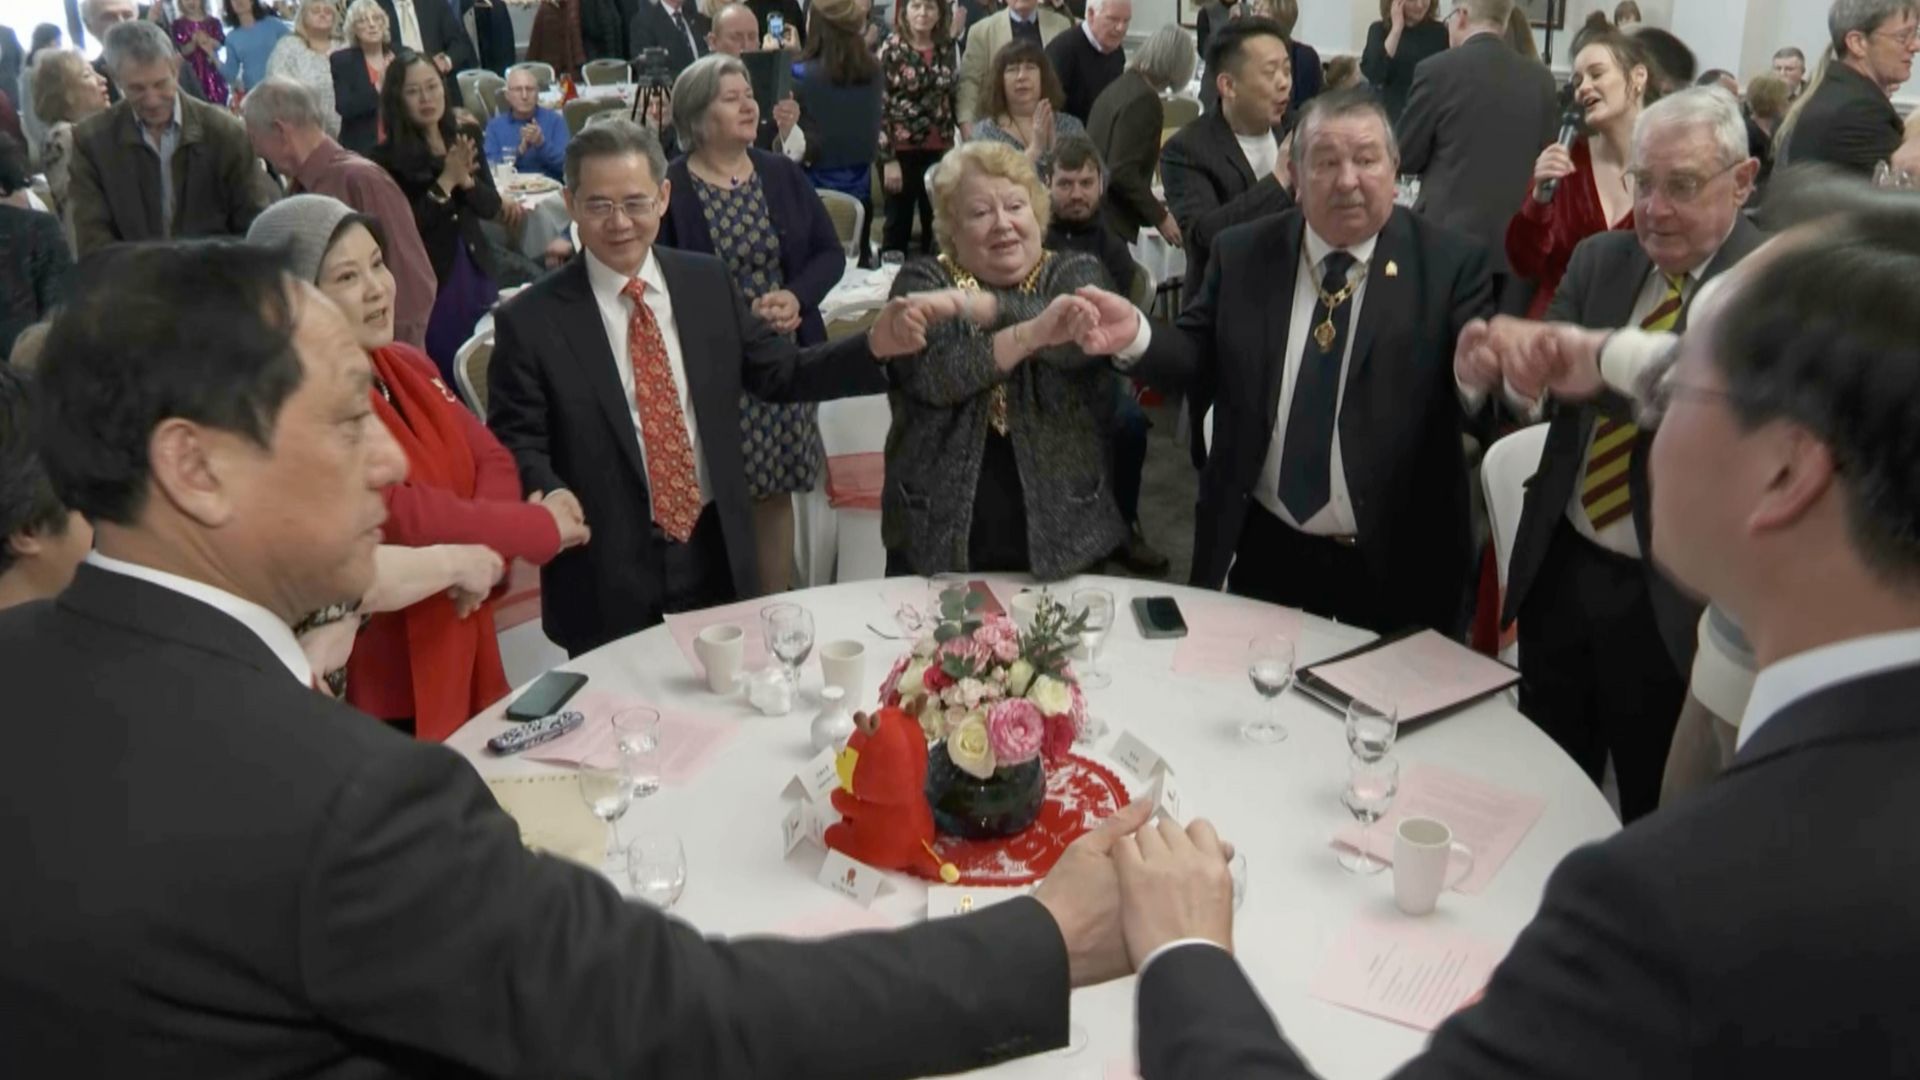 Chinese Ambassador to the UK Zheng Zeguang (red tie) takes part in a rendition of Auld Lang Syne at the Gloucester event. /CGTN